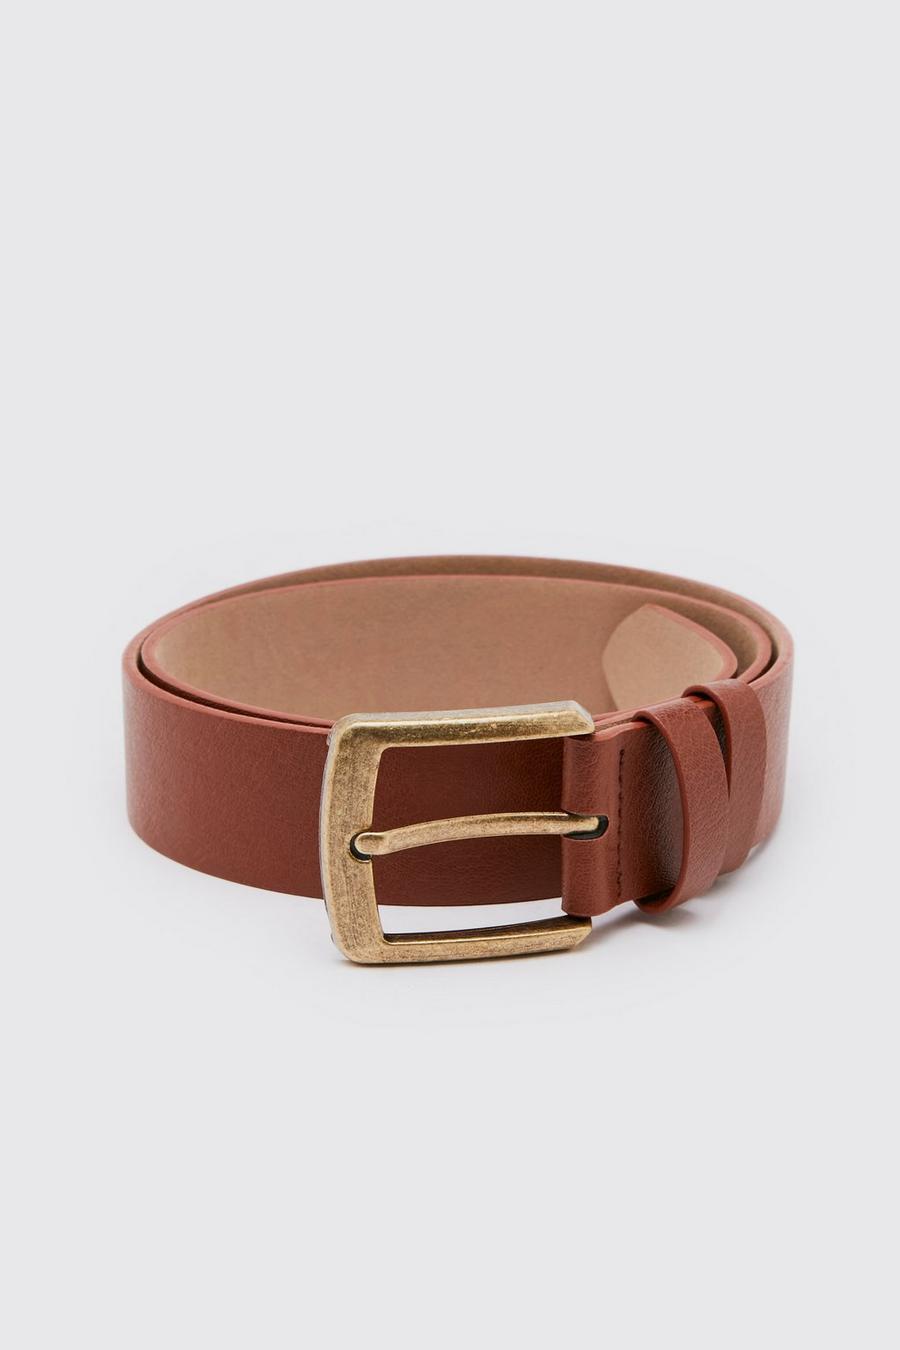 Tan brown Casual Leather Look Jeans Belt